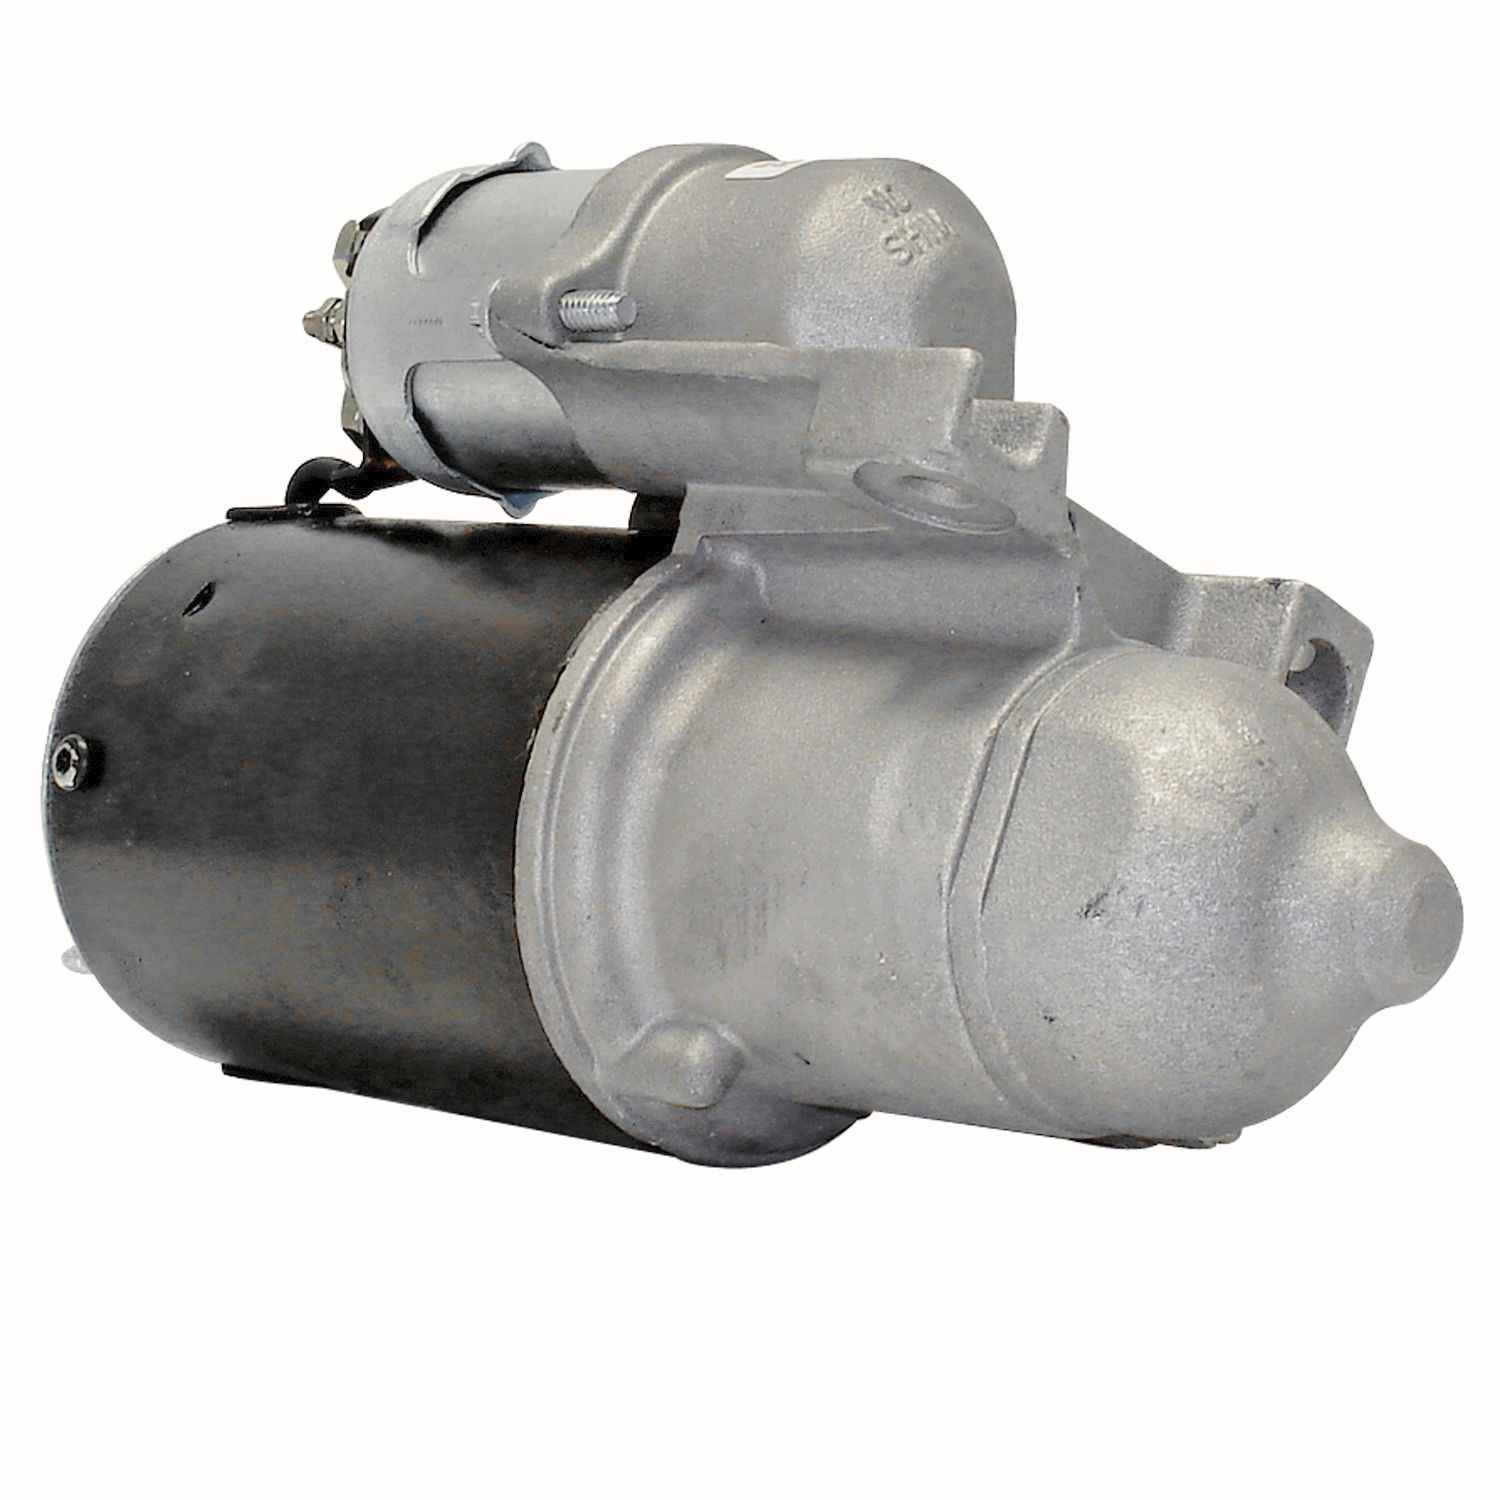 ACDELCO GOLD/PROFESSIONAL - Reman Starter Motor - DCC 336-1138A